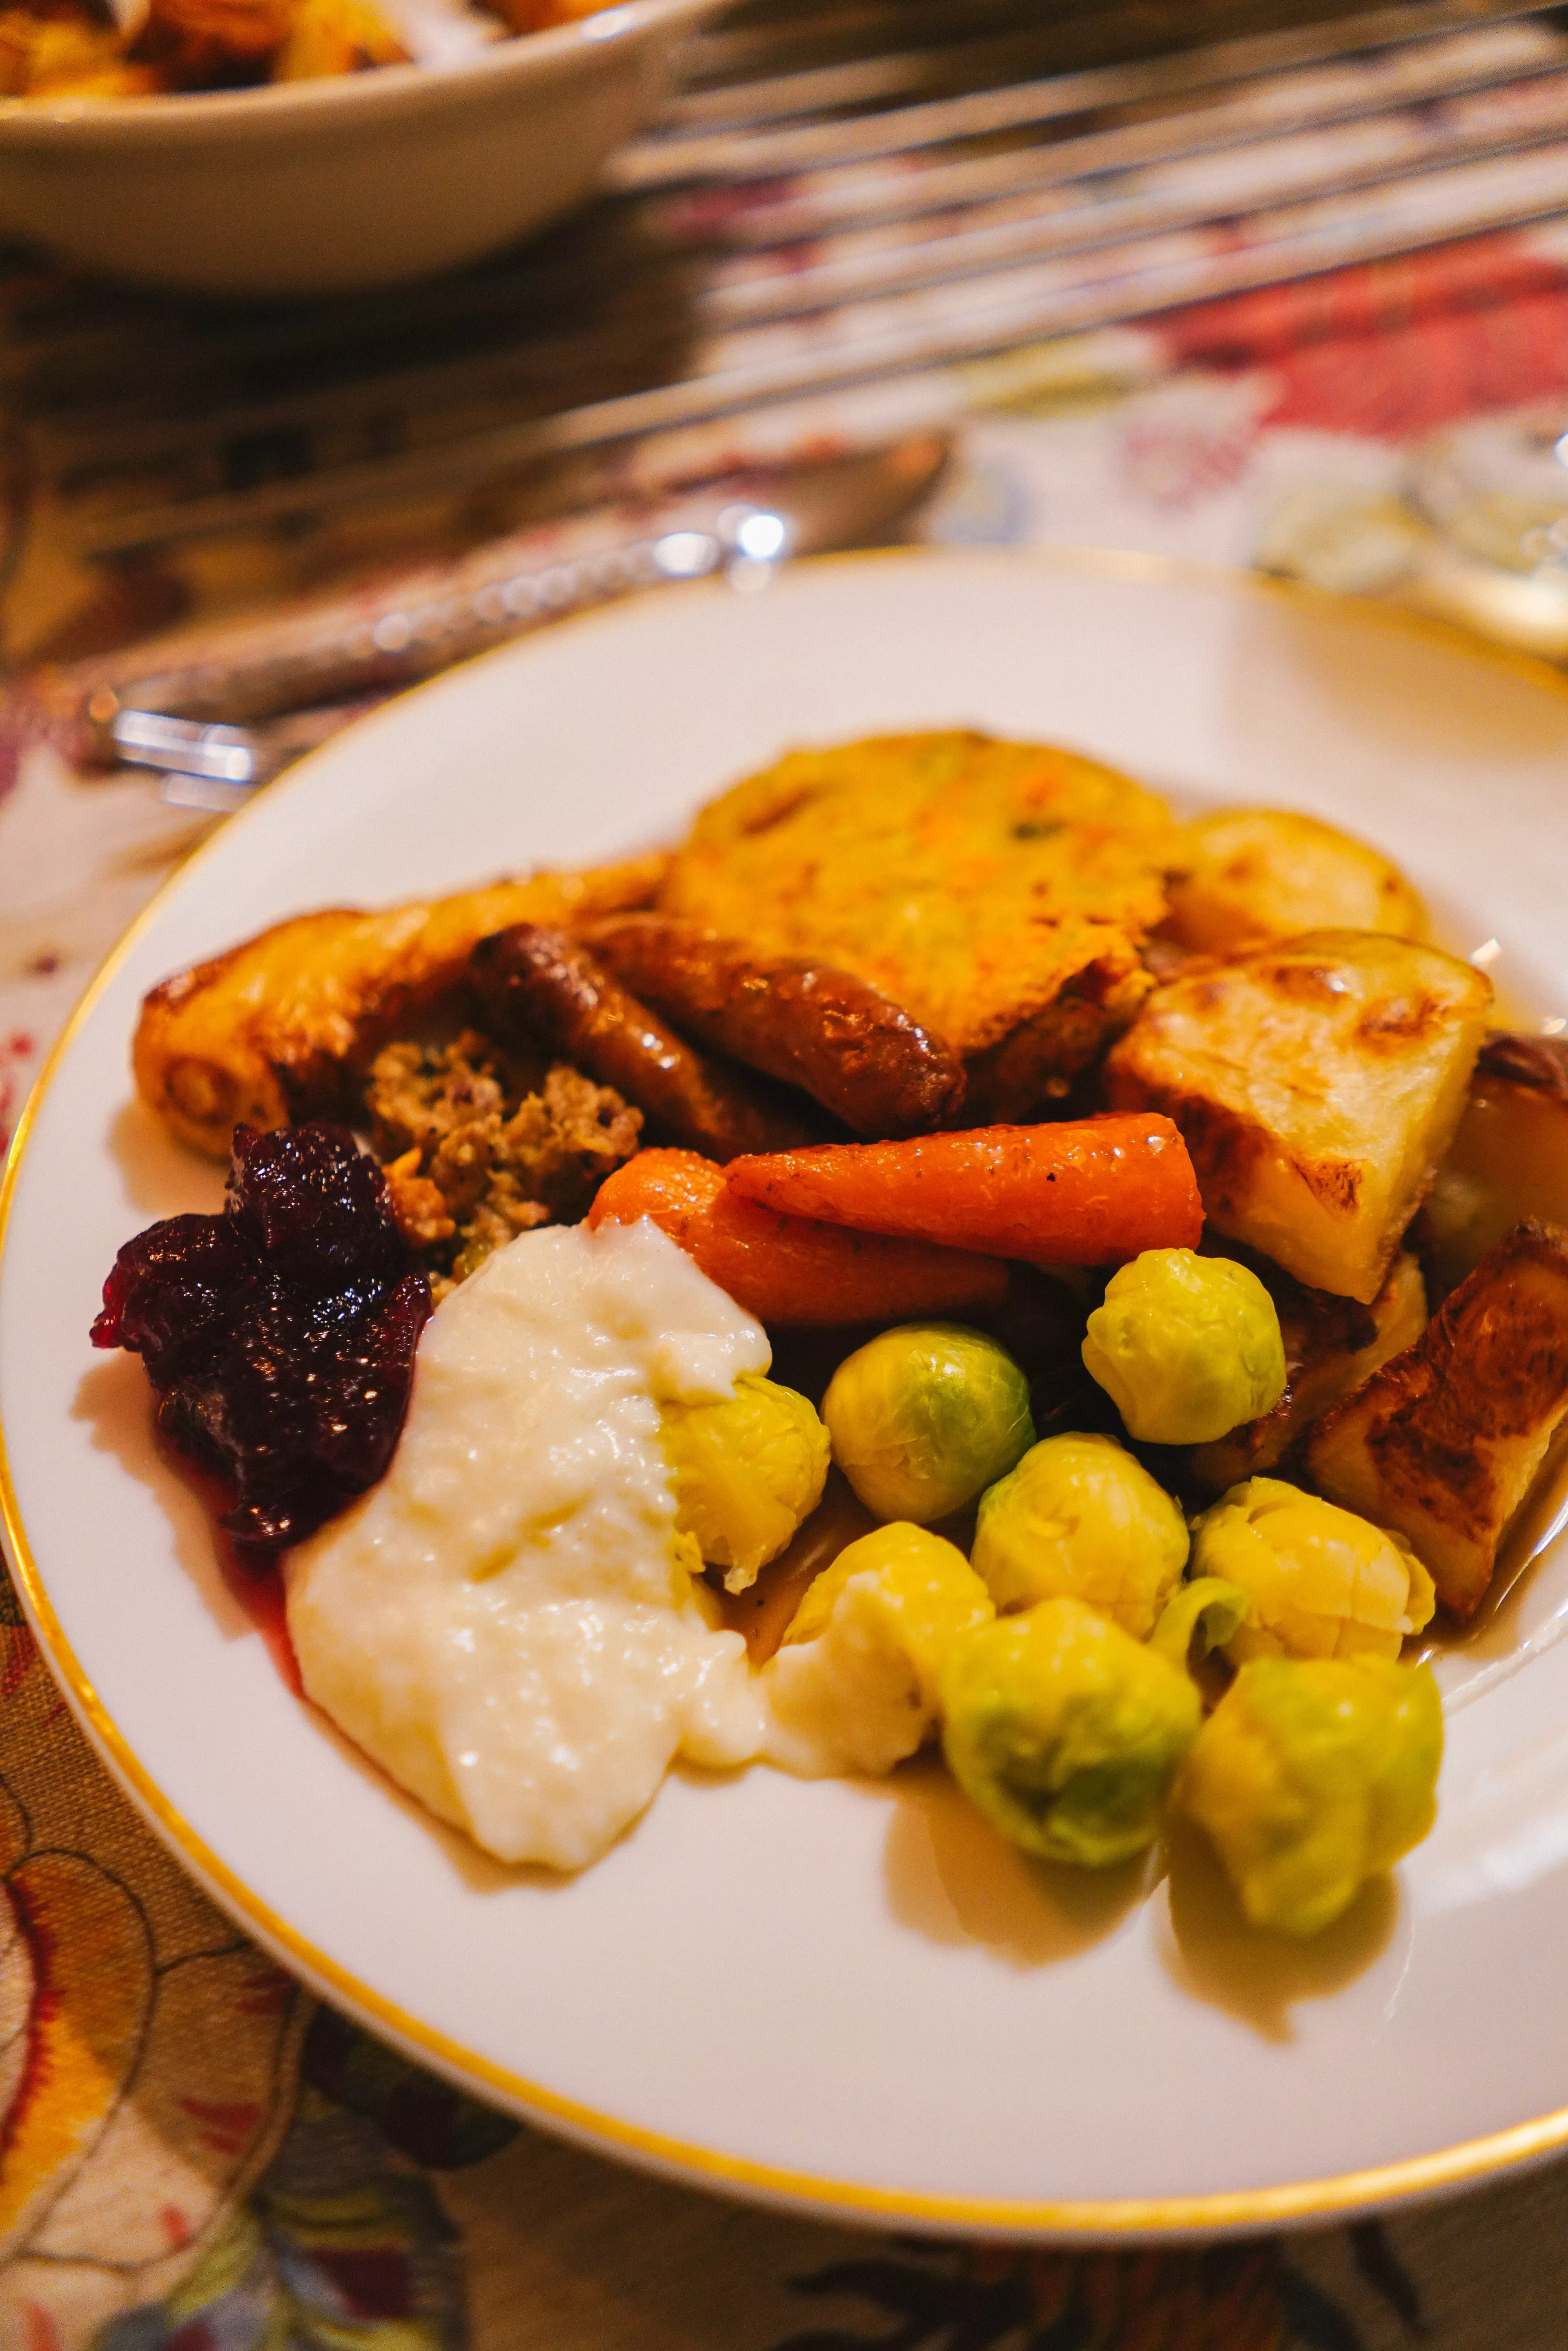 Leftover Christmas dinner can be dangerous for pets, say experts (